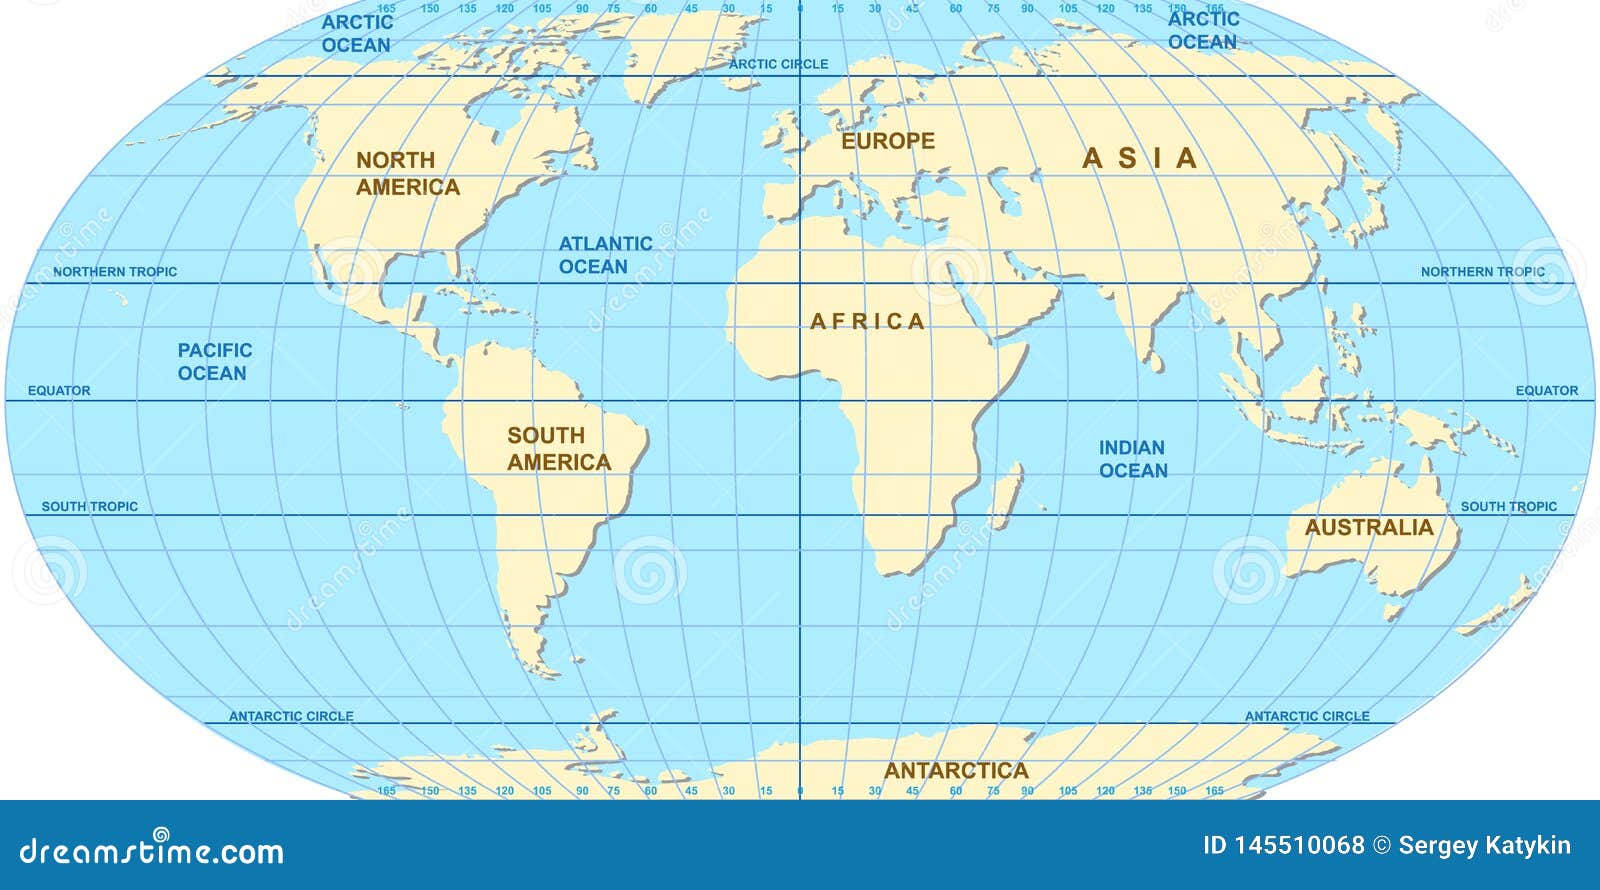 World s oceans. Карта мирового океана. Map of Oceans and Seas. World Map with Seas and Oceans.